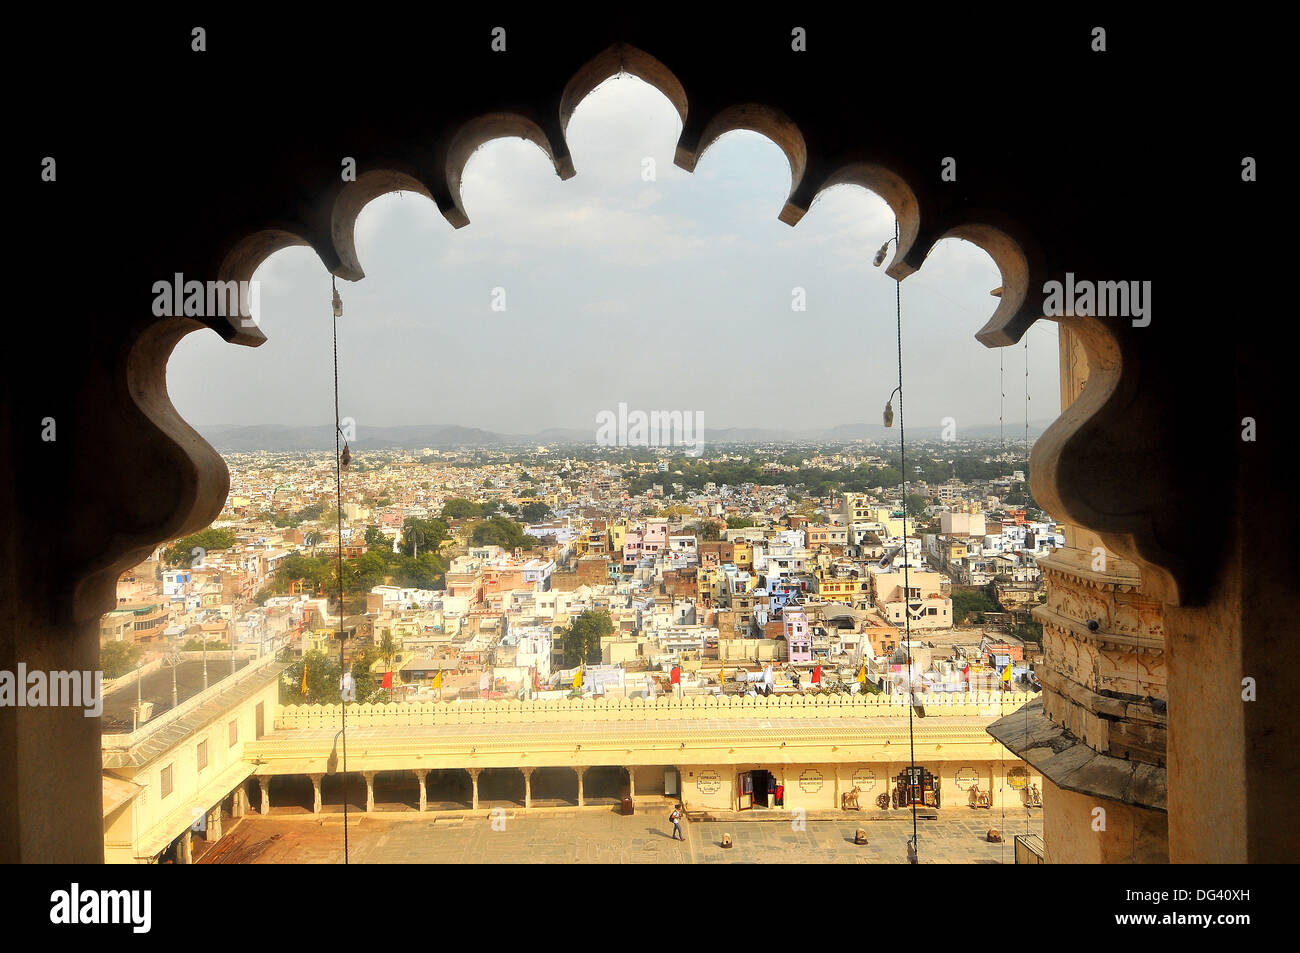 Udaipur city view from Udaipur City Palace Museum, Rajasthan, India, Asia Stock Photo